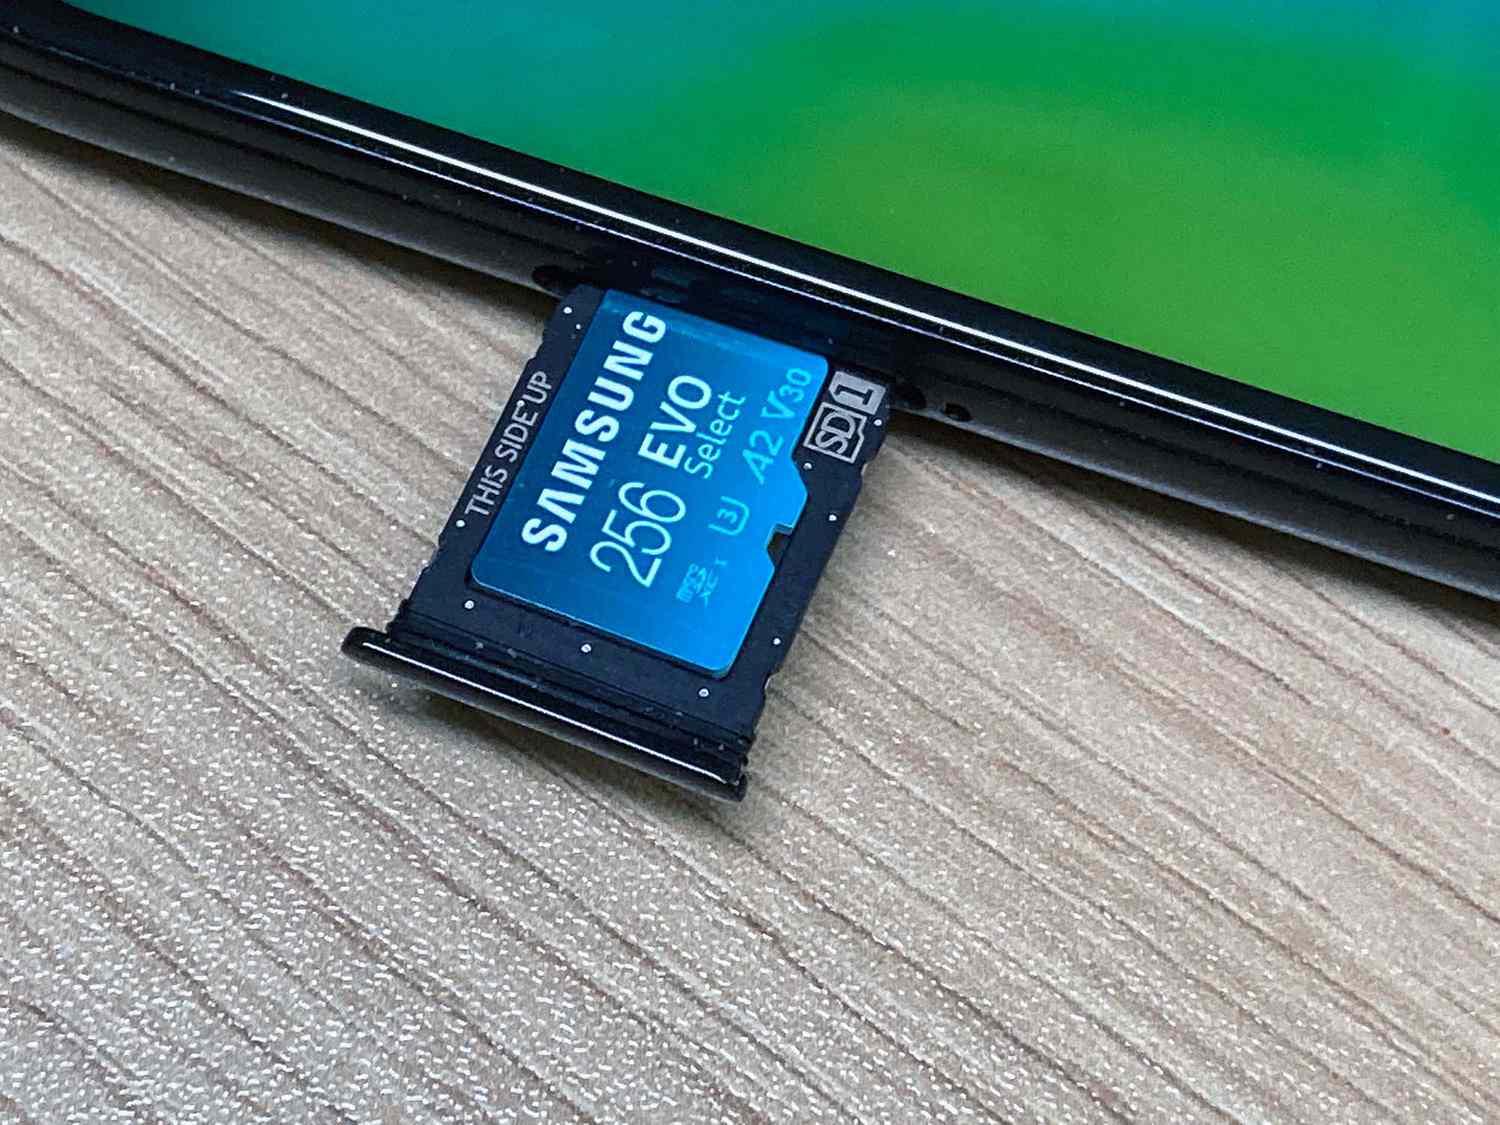 How Do I Use My Sd Card Instead of Internal Memory on My Android Phone